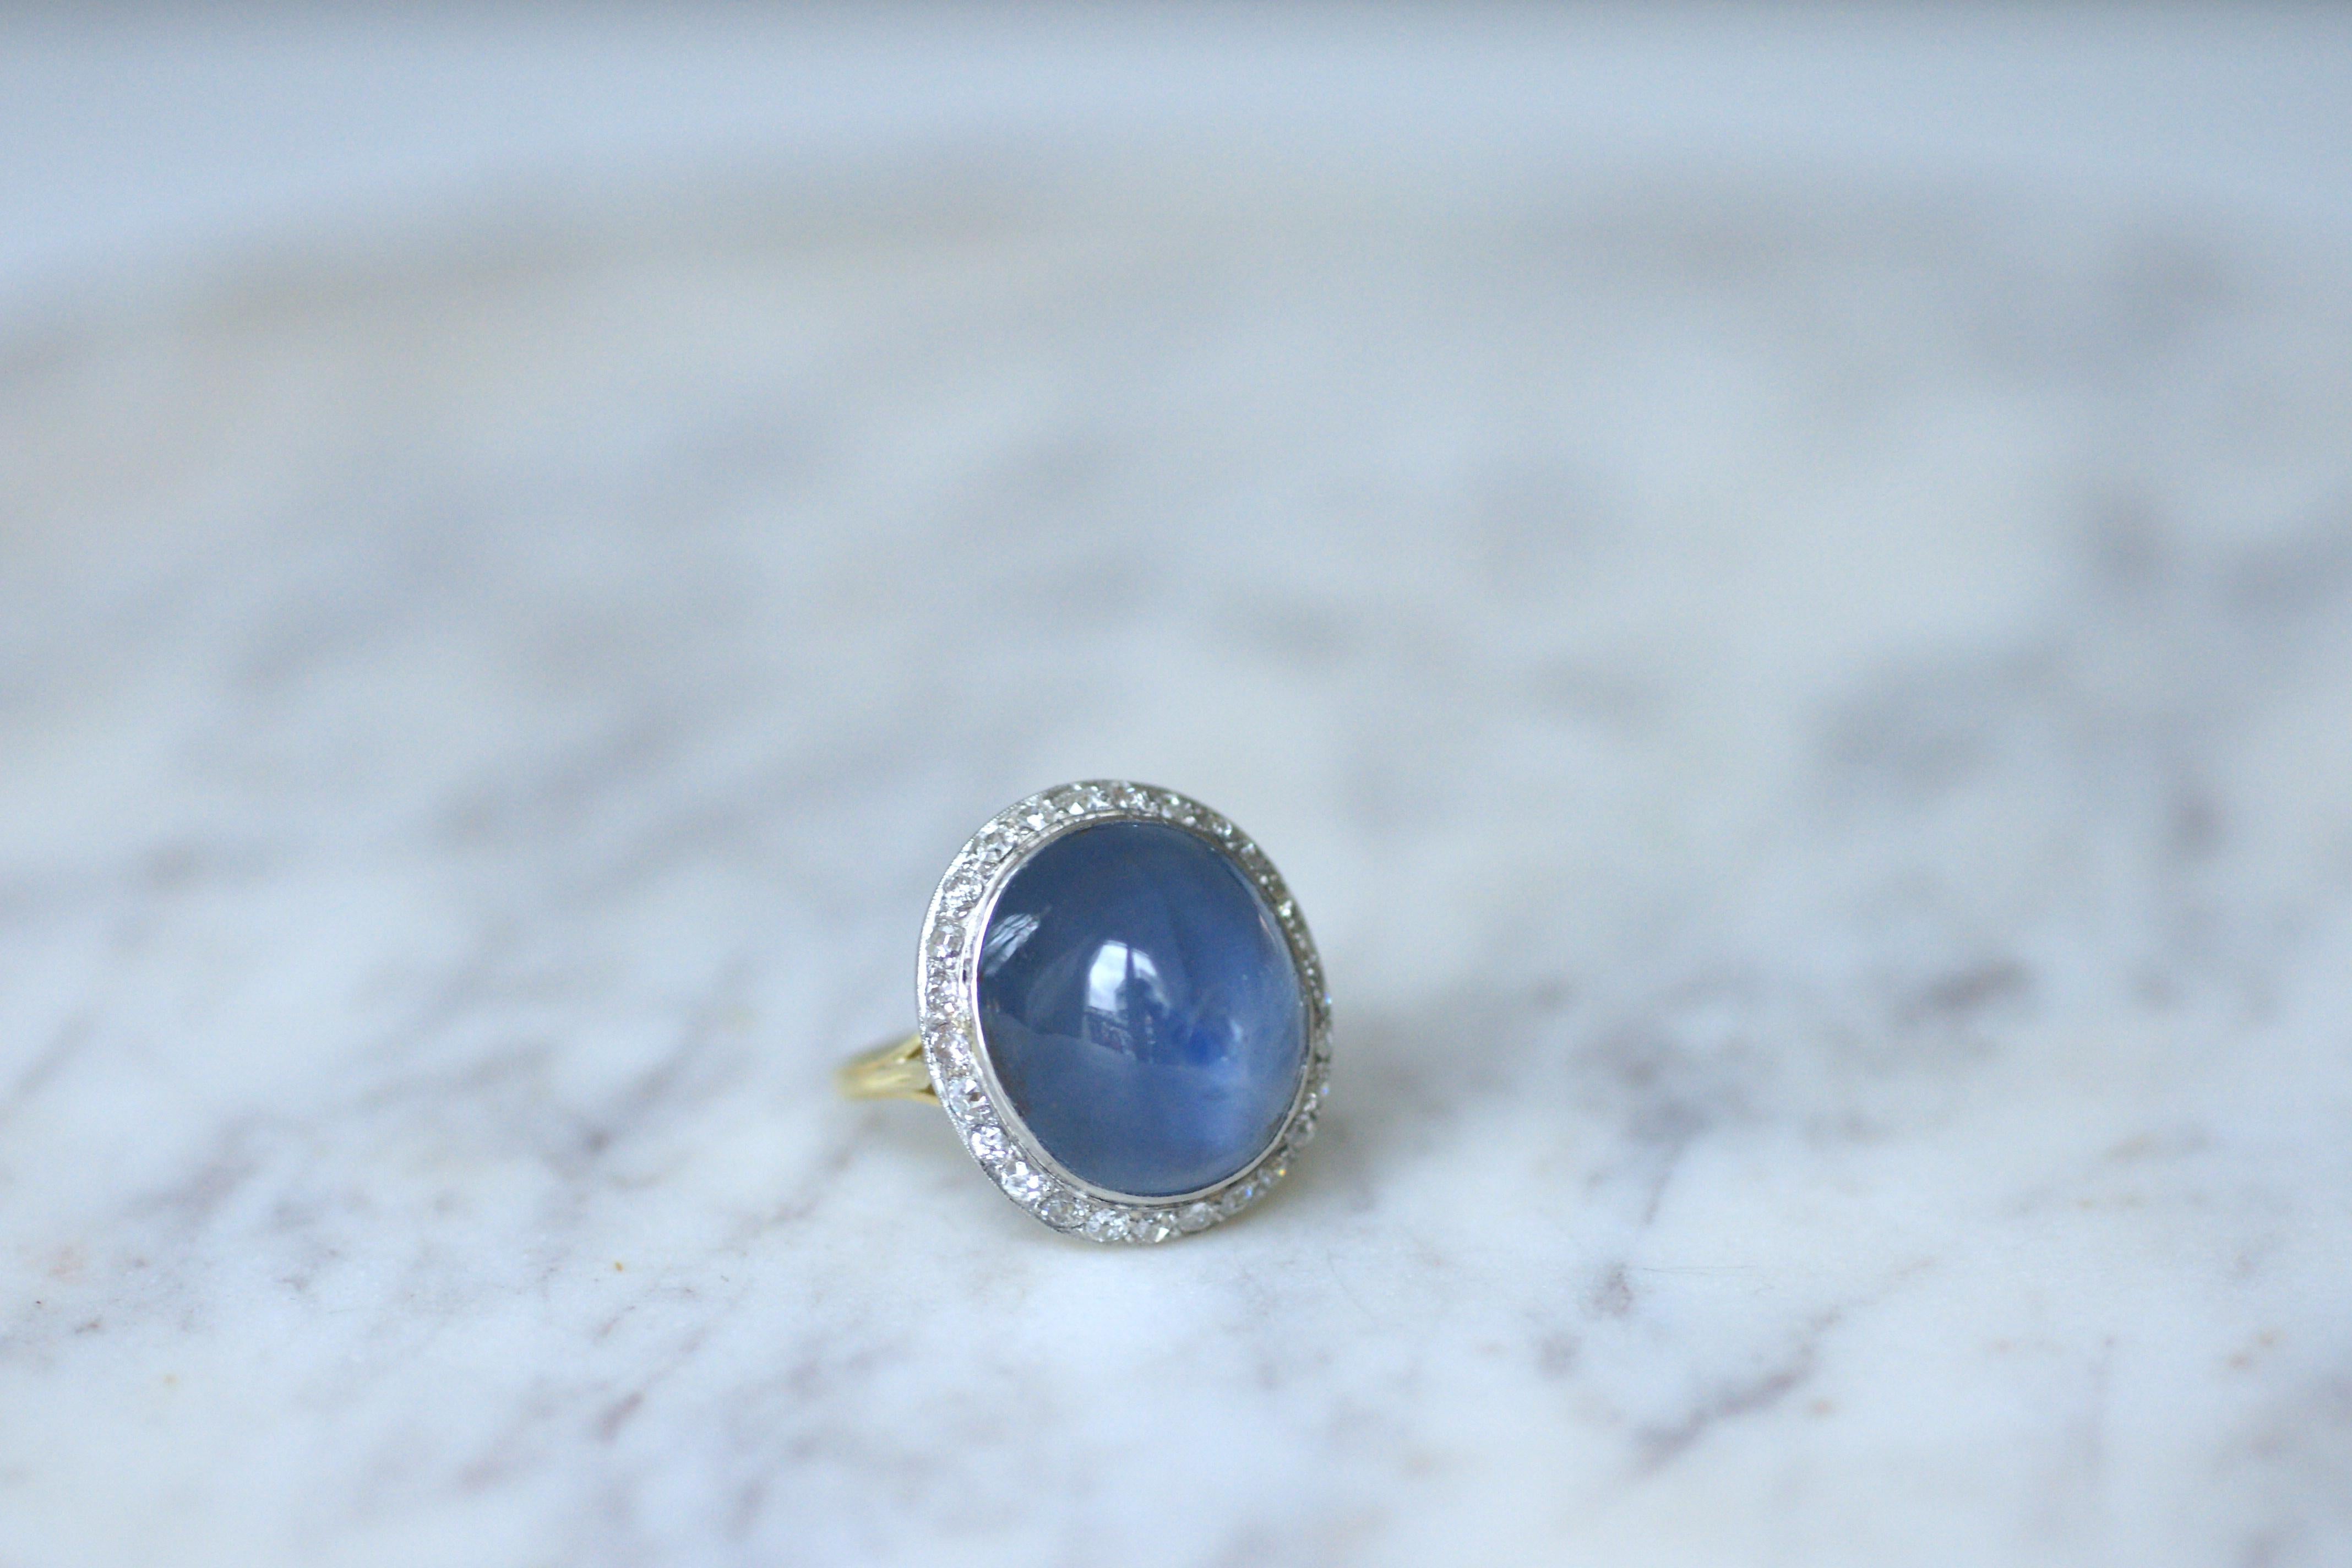 Edwardian Gold and Platinum Cluster Ring with 35cts Ceylan Star Sapphire Caboch 2